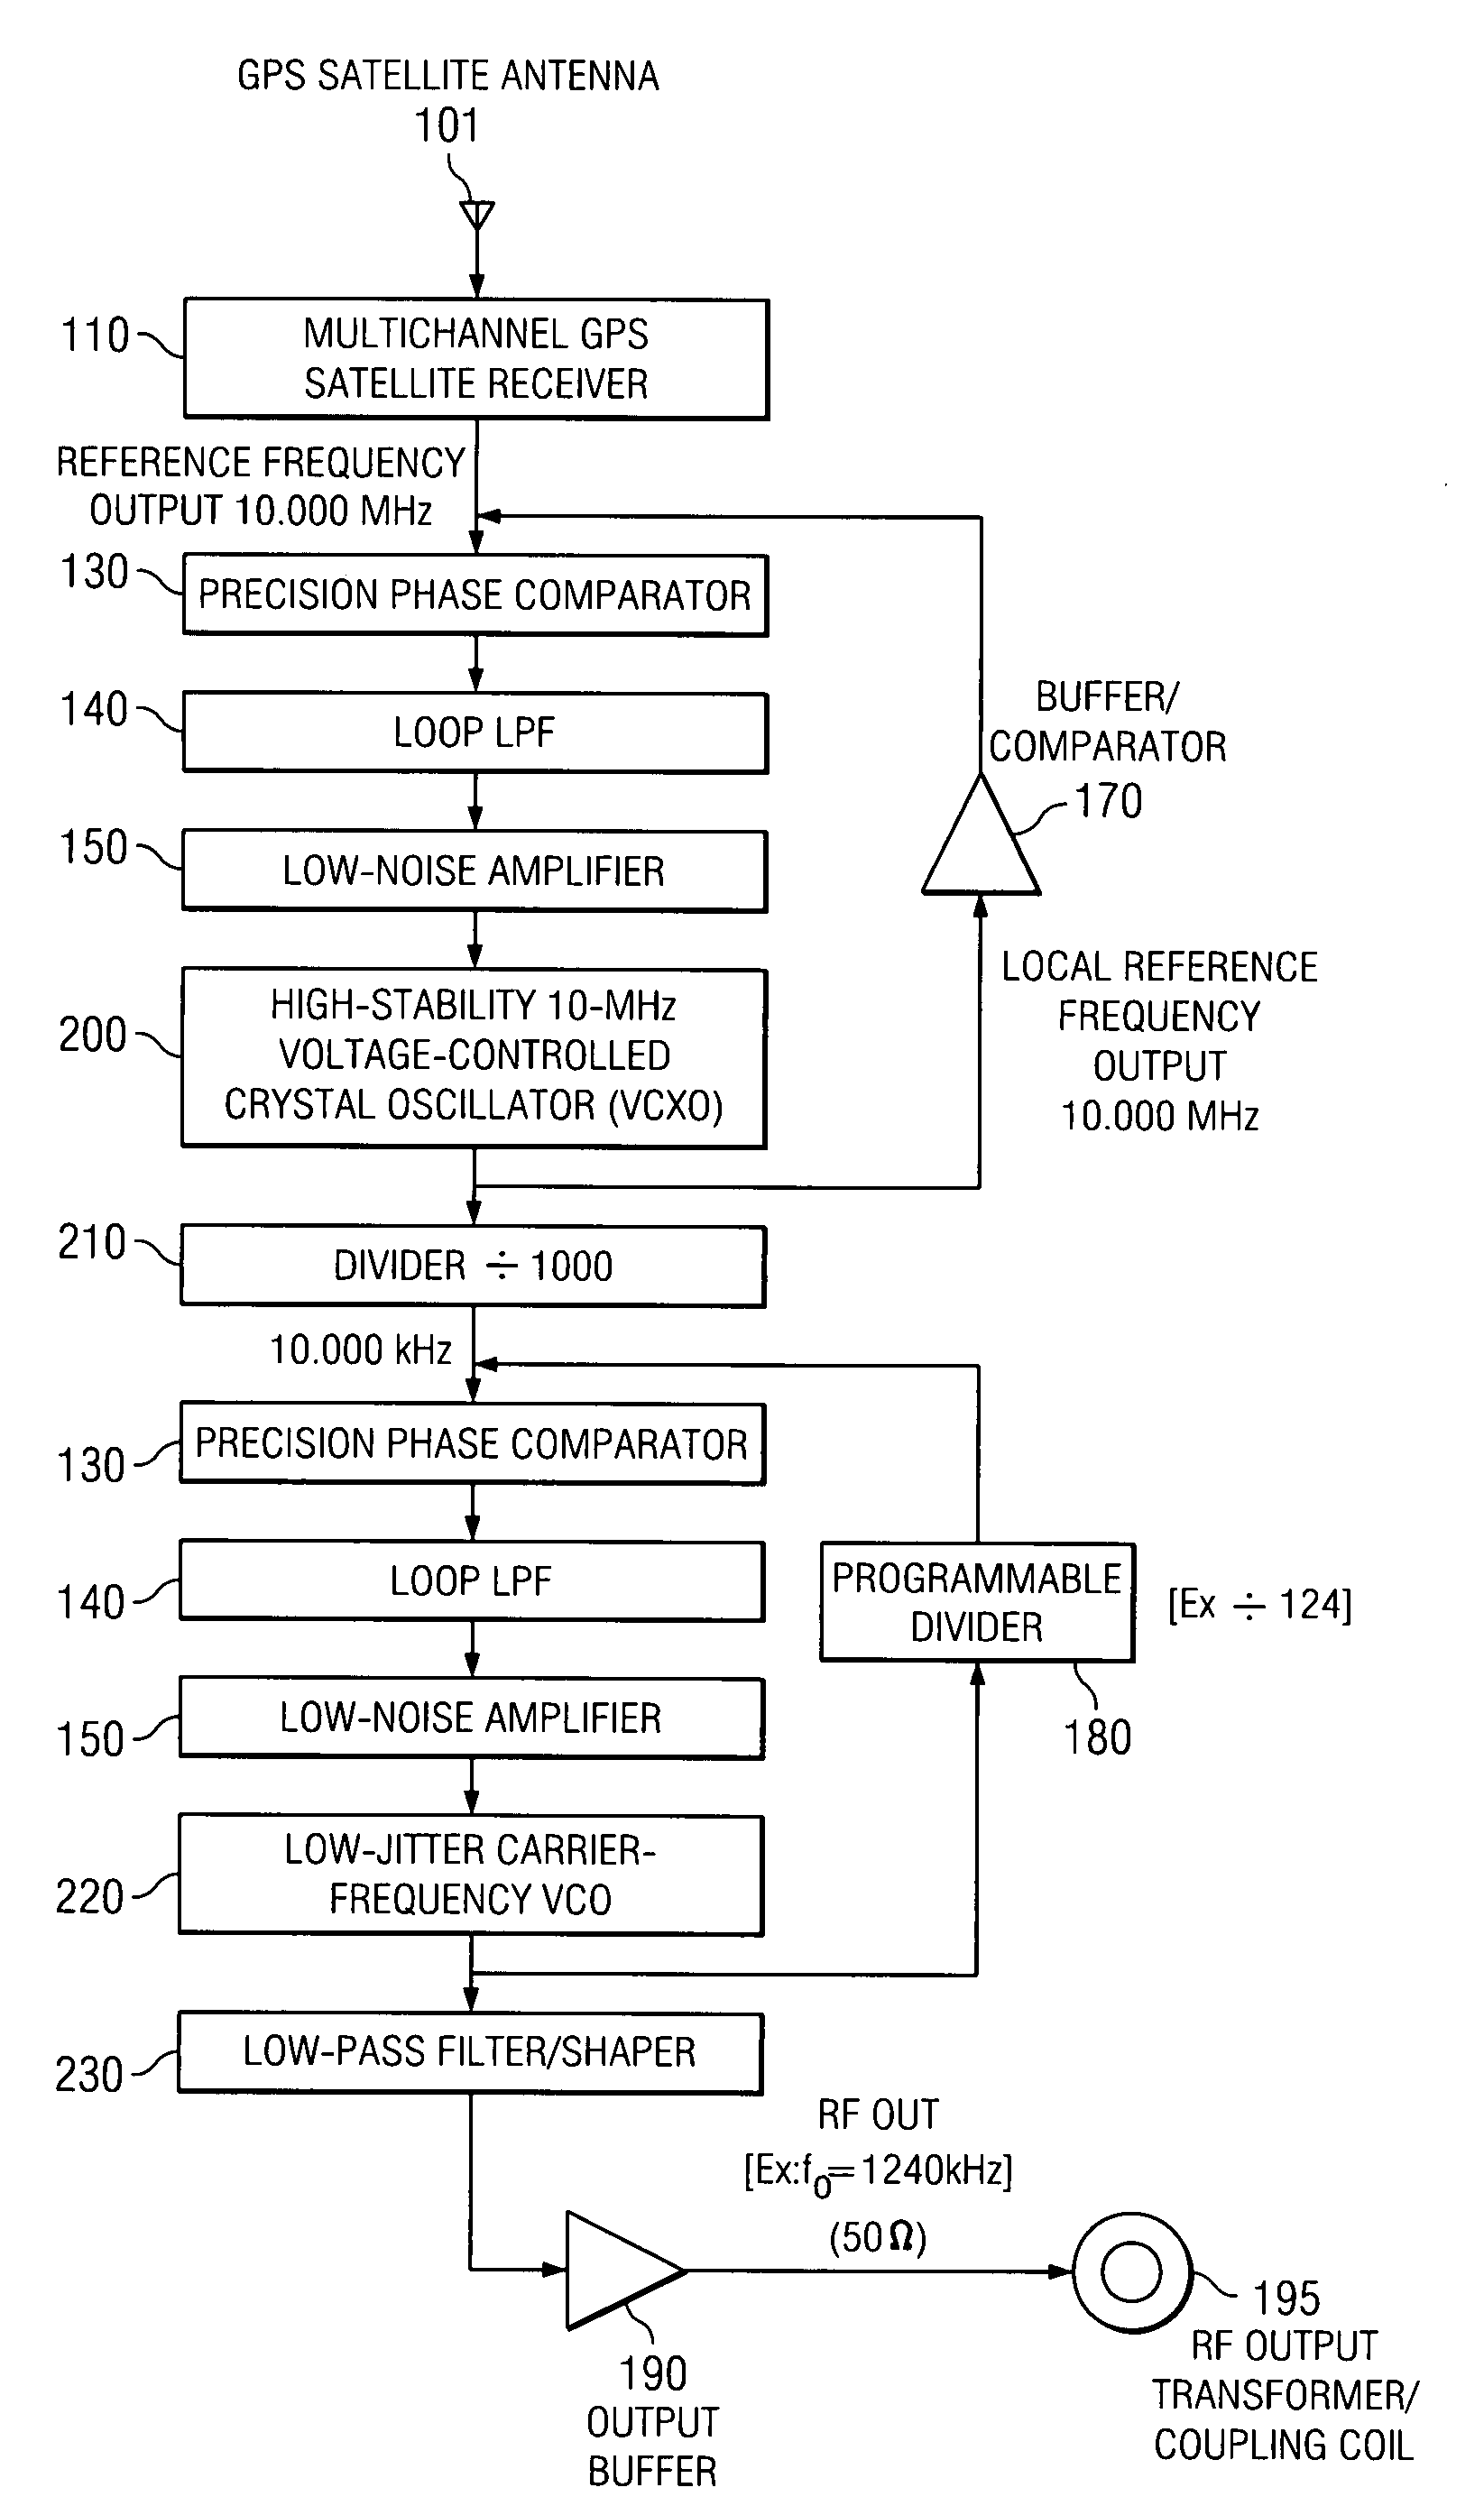 Carrier phase synchronization system for improved amplitude modulation and television broadcast reception